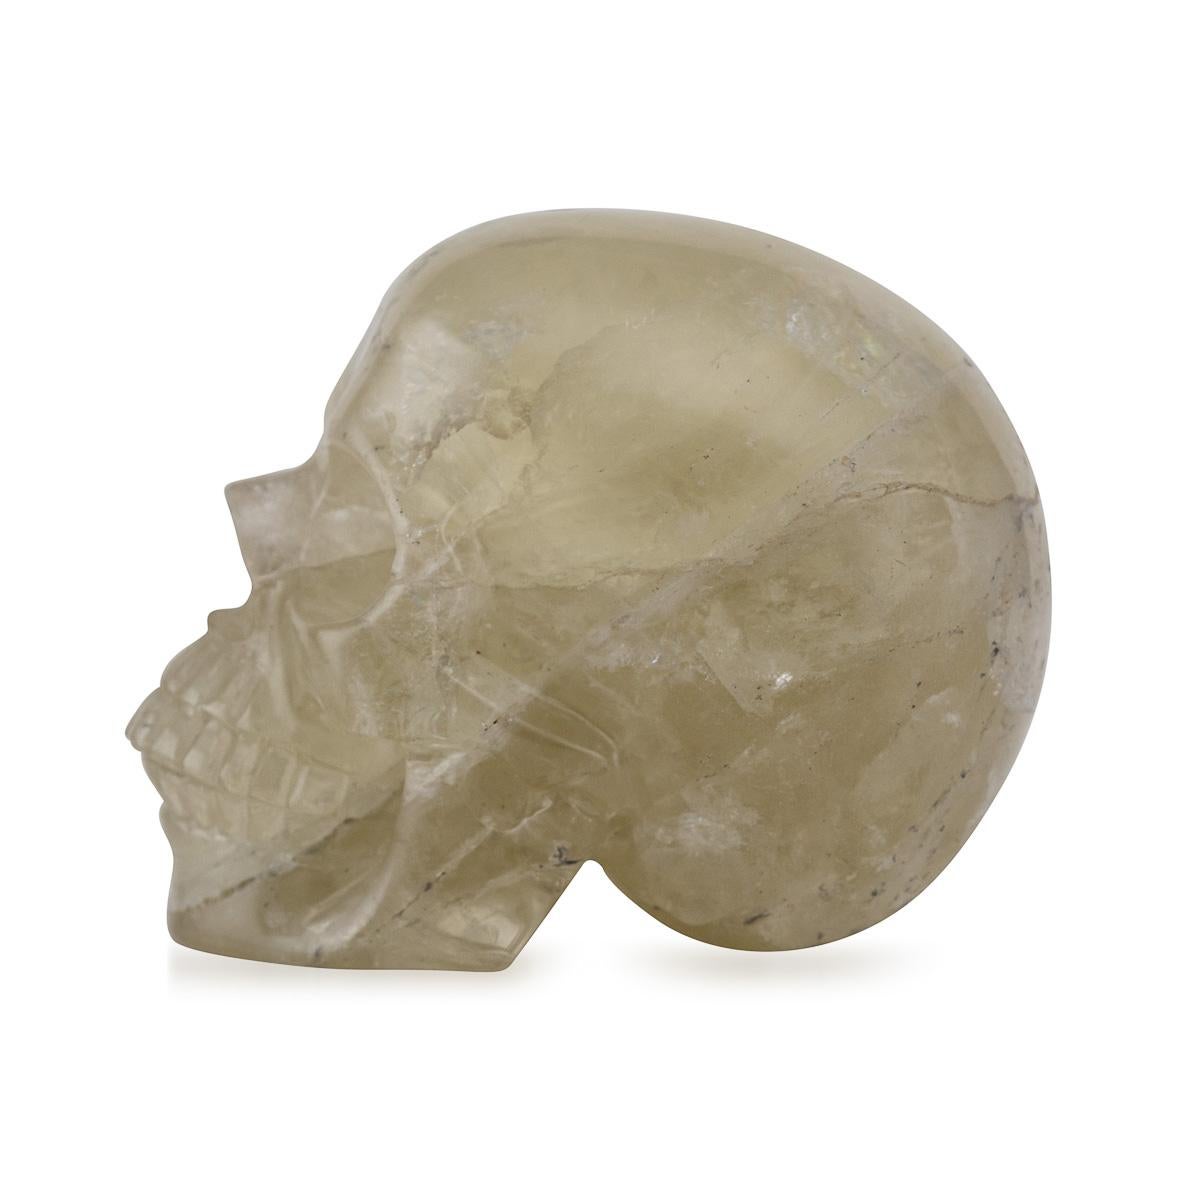 Mid 20th Century hand carved crystal skull. Crystal skulls are intriguing and often mystifying artefacts crafted from various types of crystal or gemstone, including quartz, amethyst, and more. 

CONDITION
In Great Condition - Please refer to